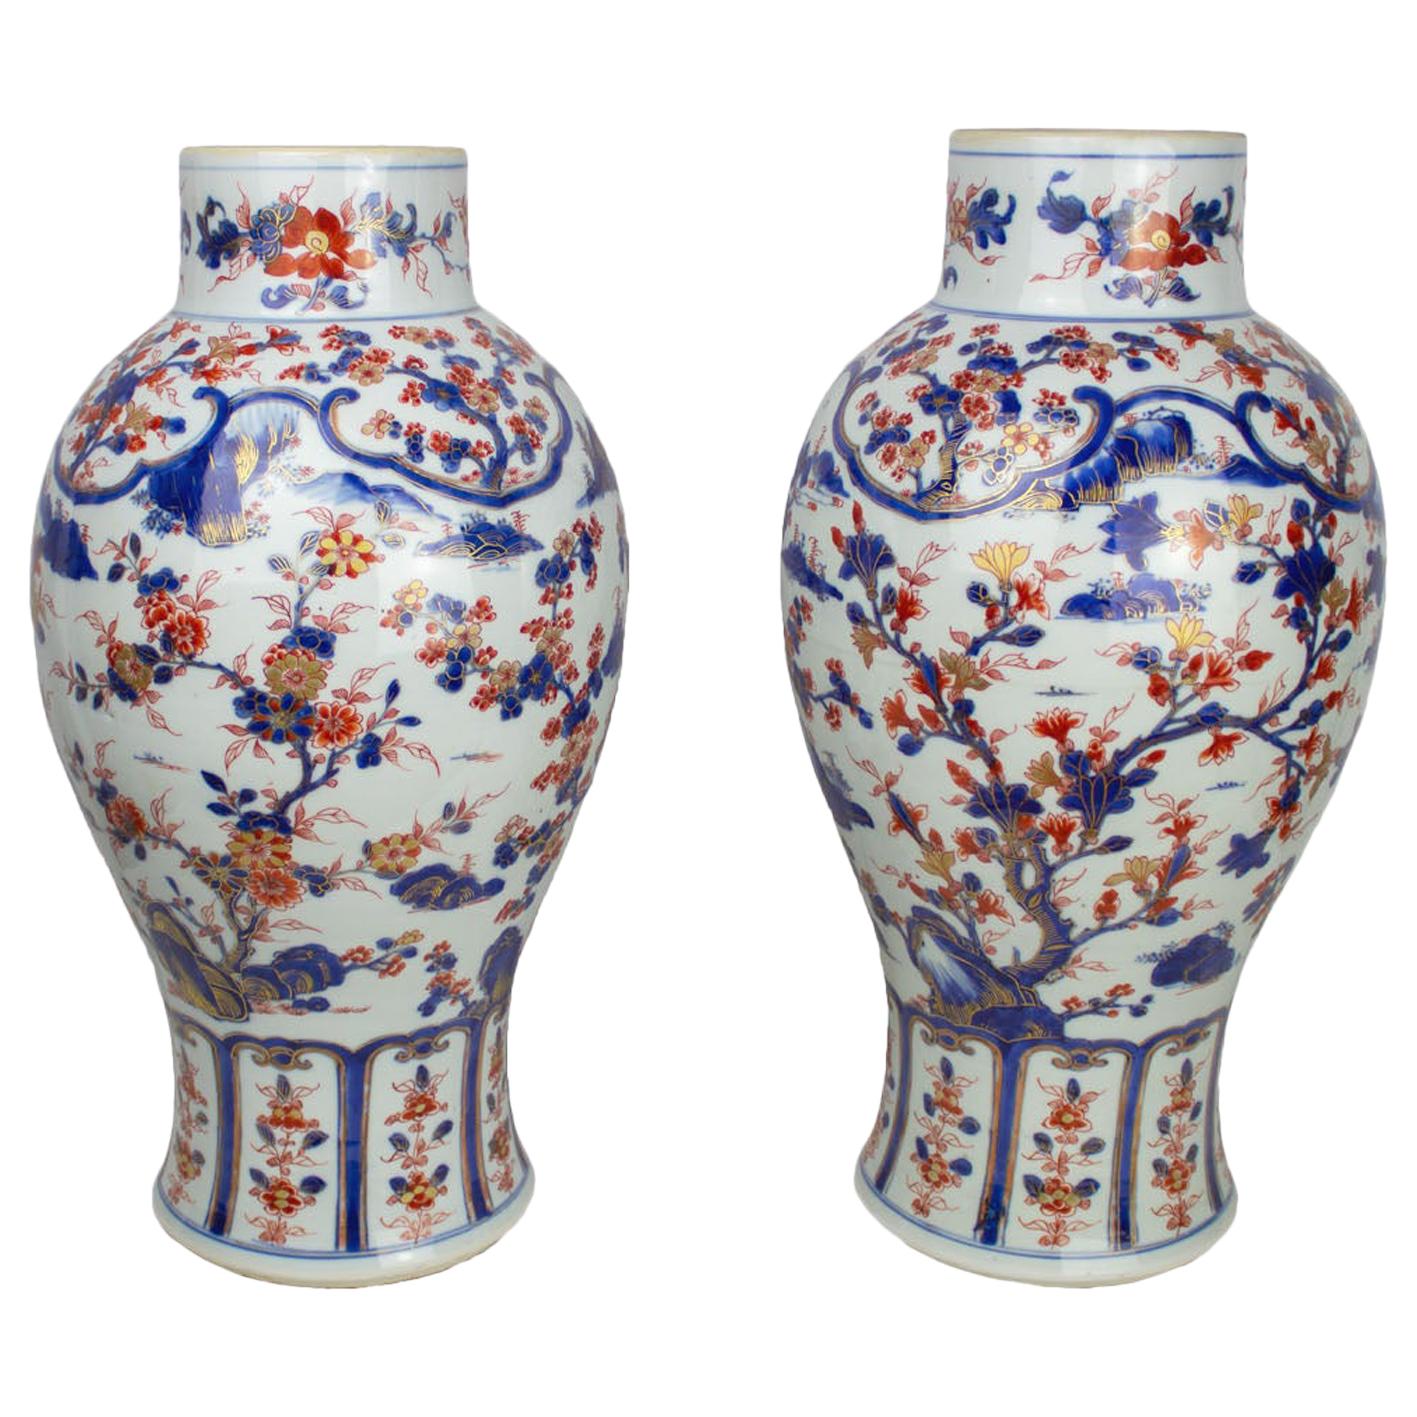 Chinese Export Porcelain Pair of Jars, Kangxi, '1662-1722' For Sale